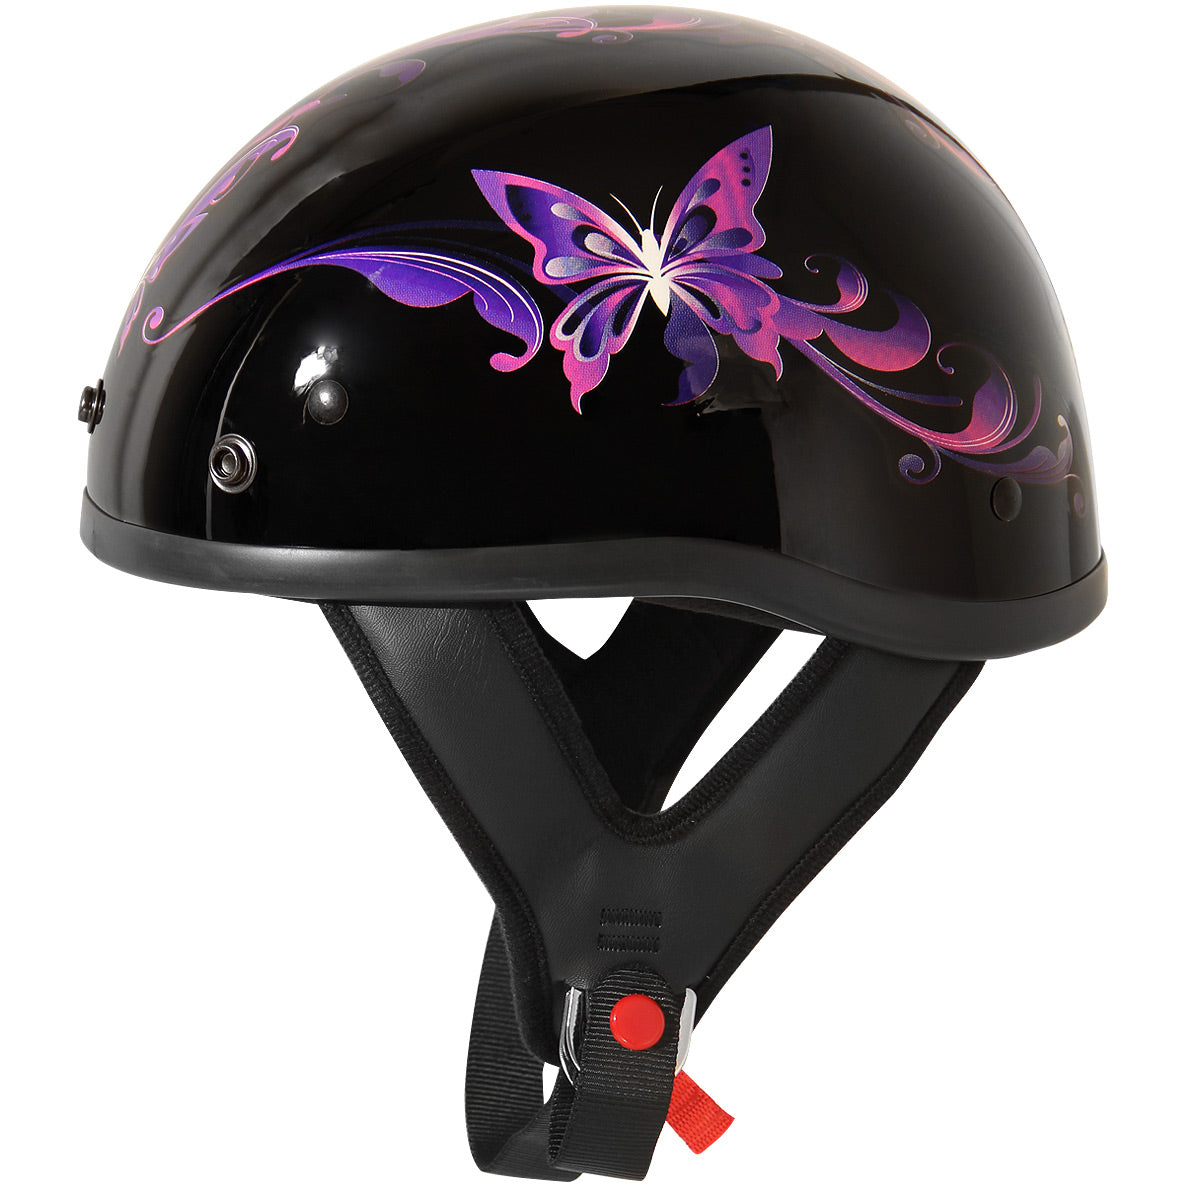 Women's Motorcycle Helmets (The Non-Boring Guide), Pillioness